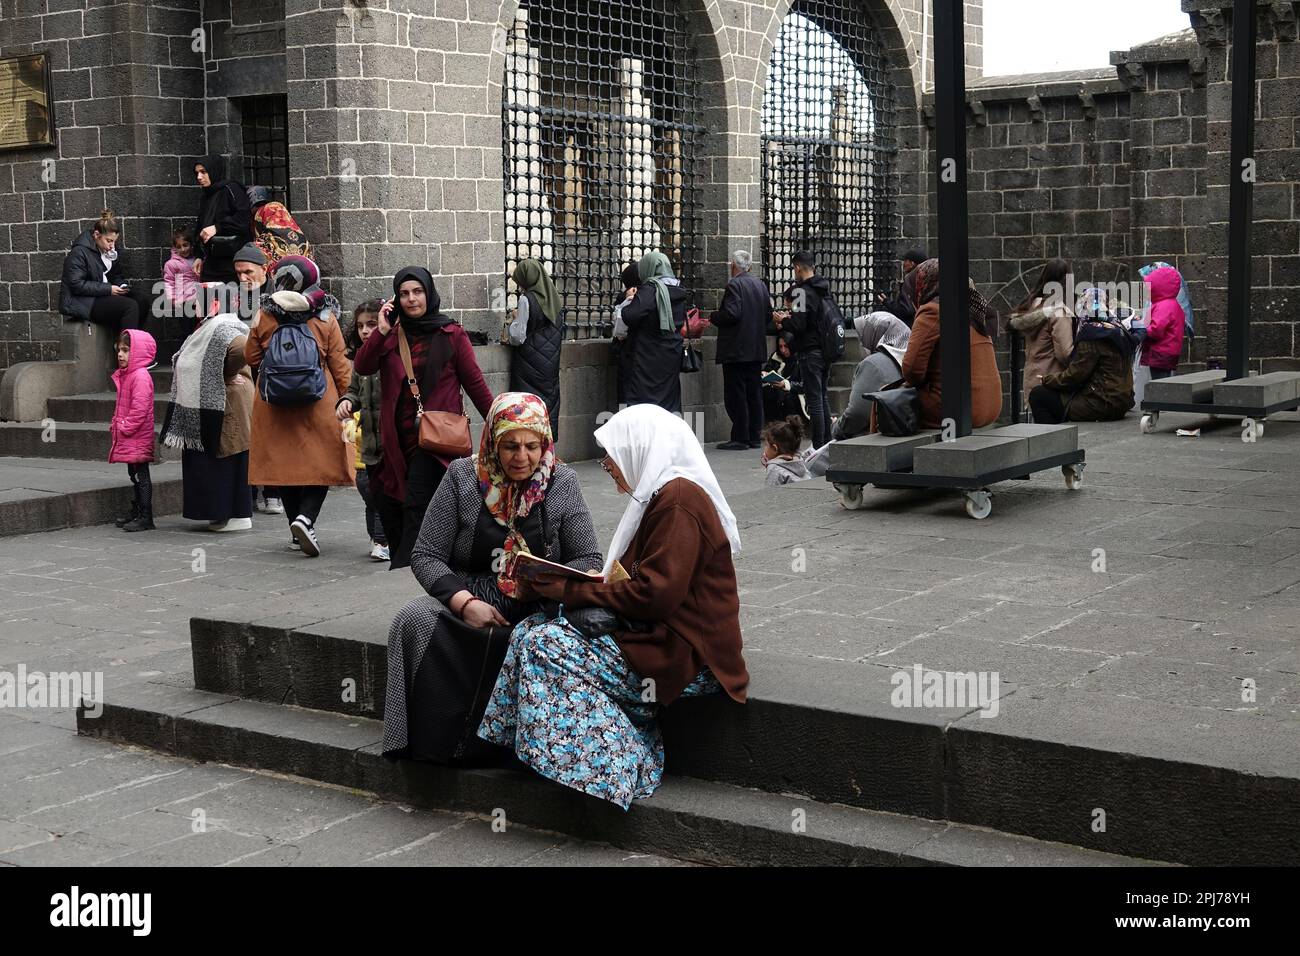 A woman is seen listening to another woman reciting the Quran as they visit the shrines in Diyarbakir. The month of Ramadan sees visits to holy places and shrines, praying and making wishes. One of these holy places is the Hazrat Suleyman mosque, which was built in 1150 and is one of the important religious and touristic centers of the world's Muslims. In the garden of the mosque there are shrines of 27 people who died here during the spread of Islam and were said to be descendants of the prophet (Sahaba) Mohammed. Those who visit the shrines, read the Quran, pray and make wishes. (Photo by Me Stock Photo